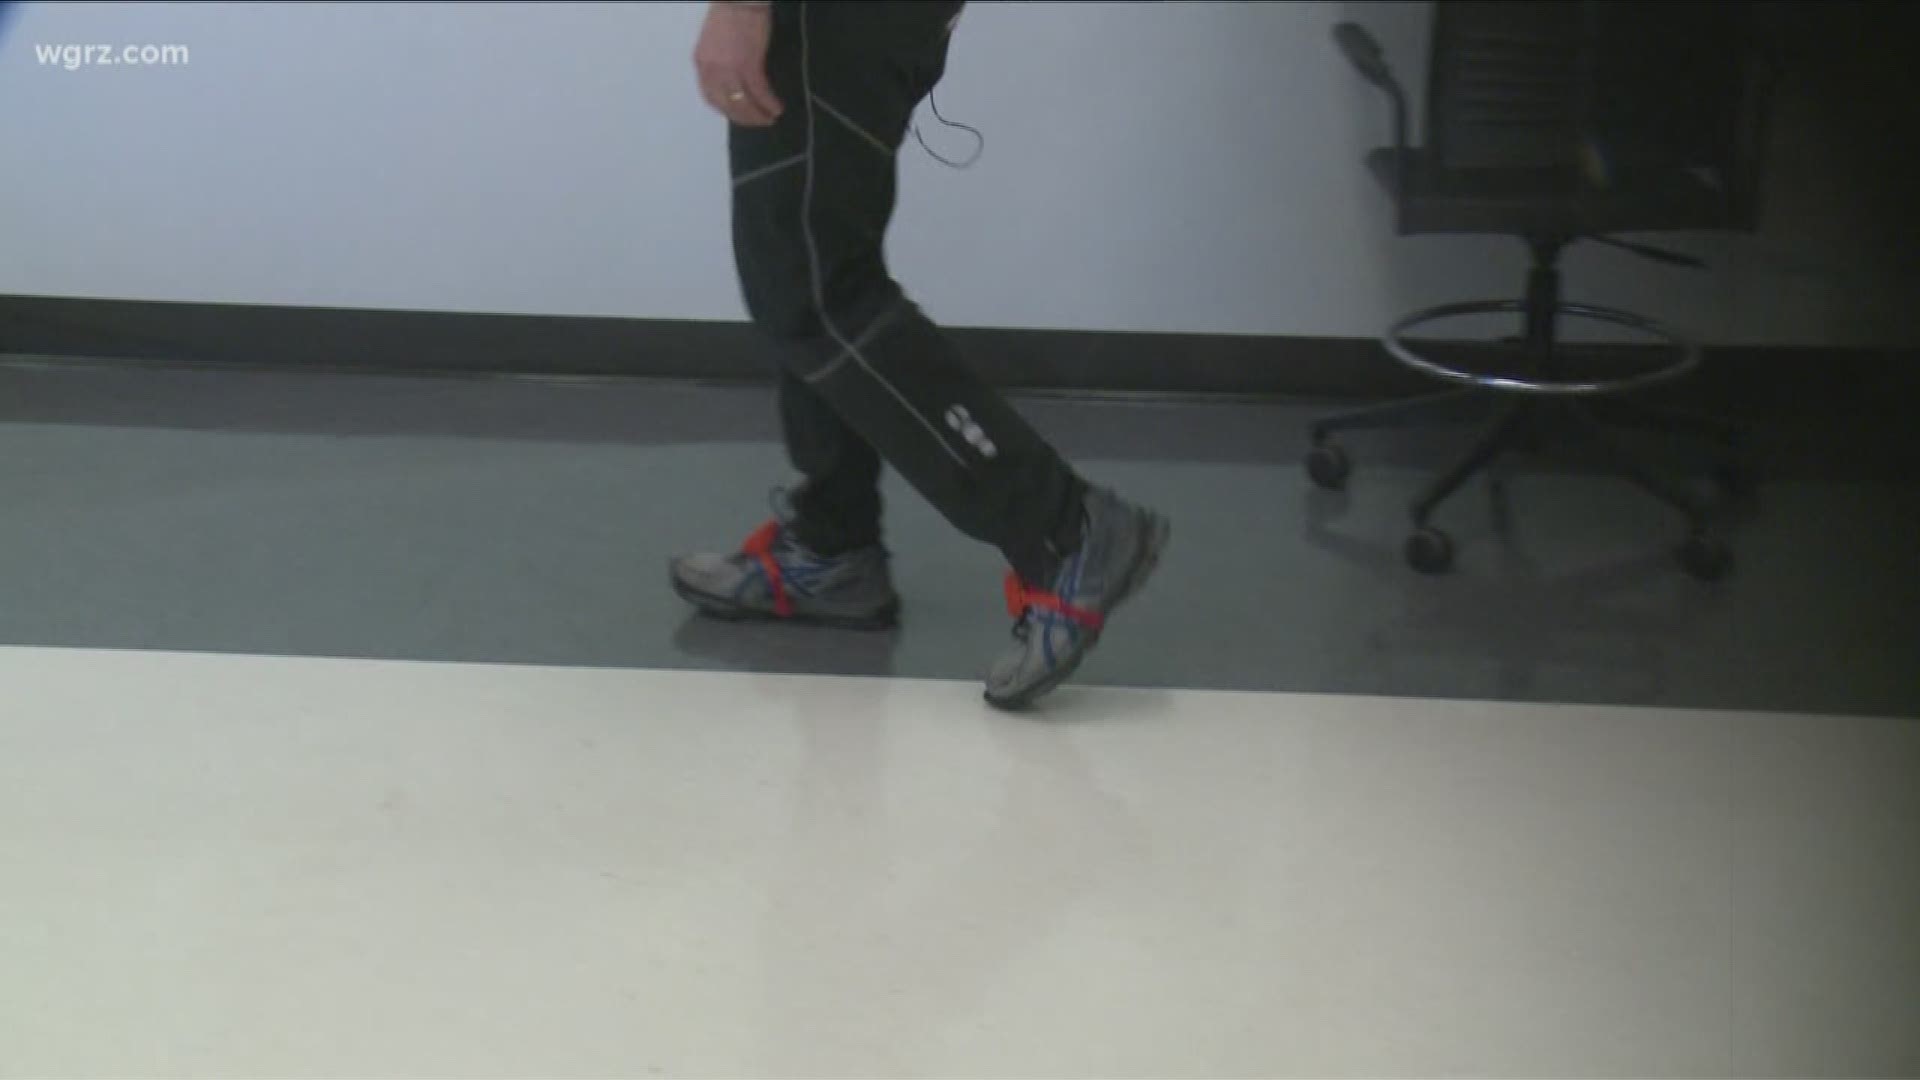 could help people all over western new york who have walking problems